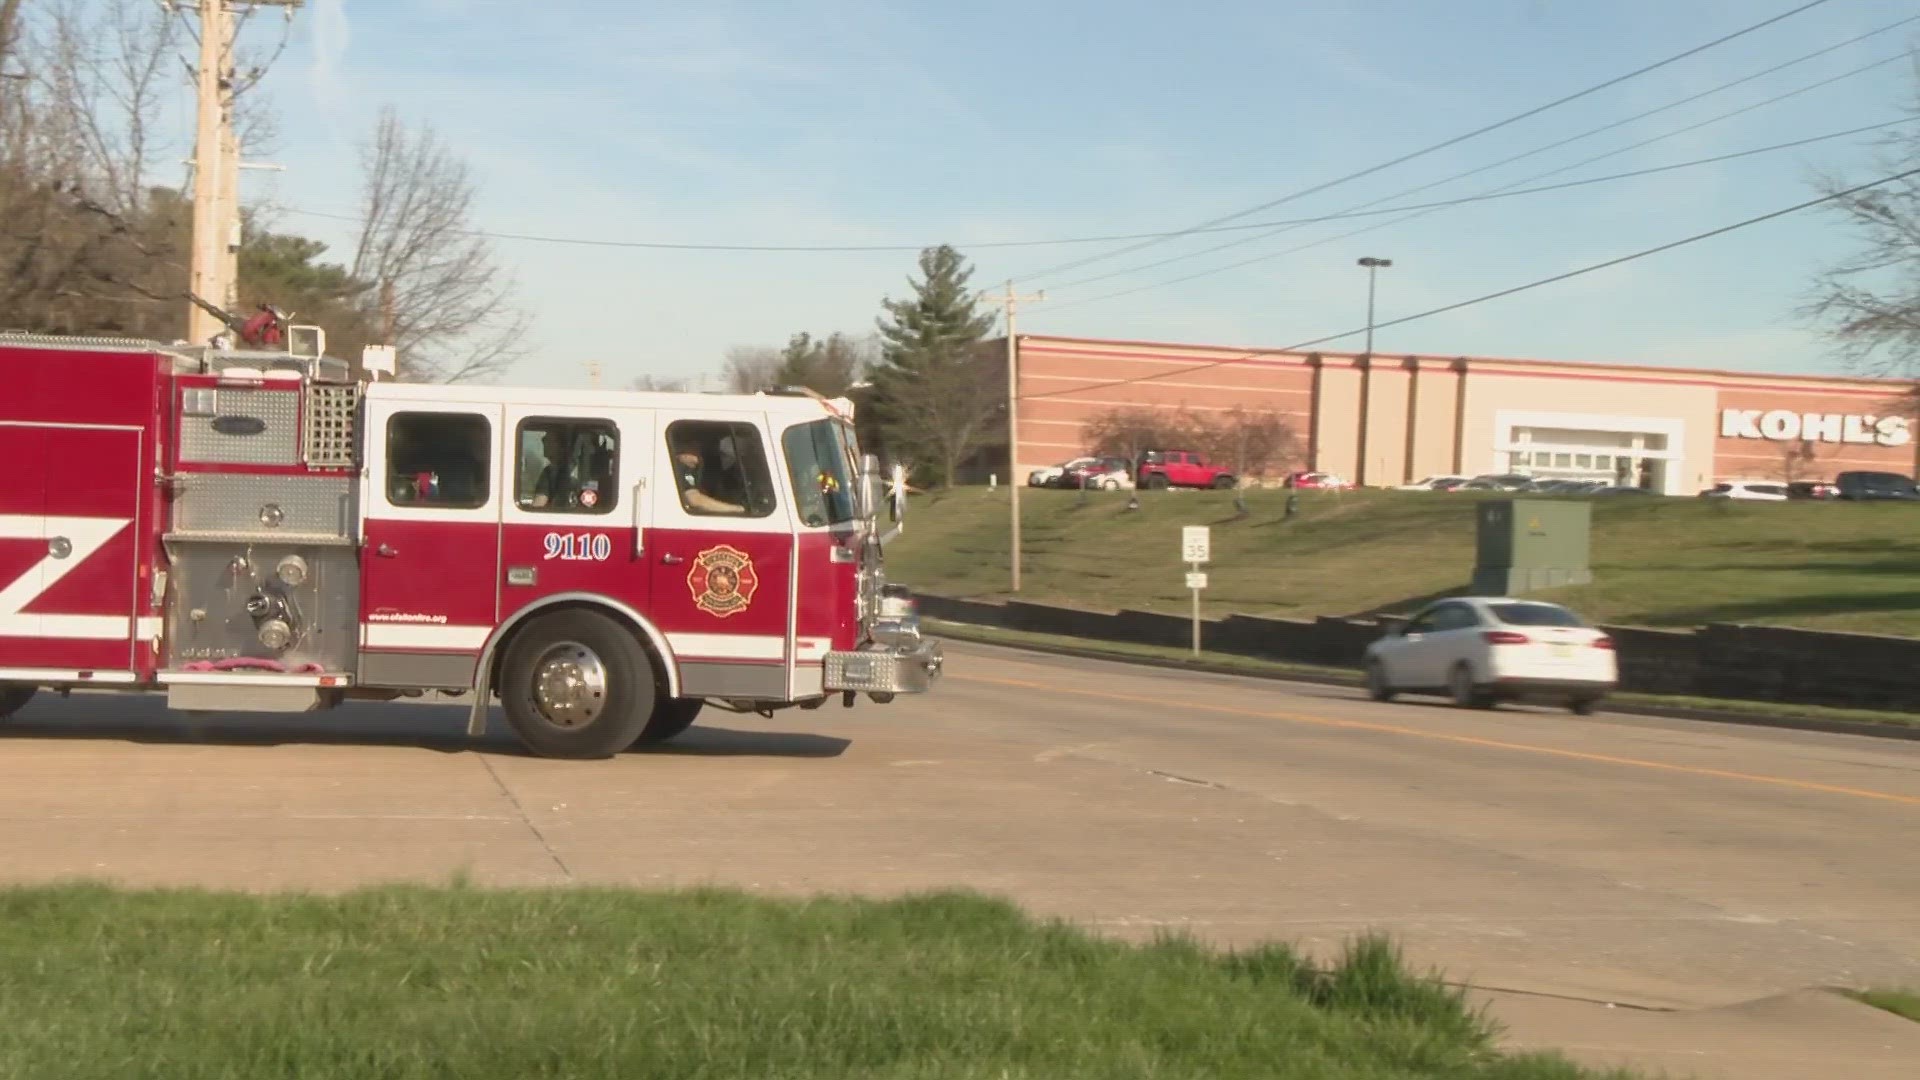 Next week, voters in O'Fallon, Missouri will decide whether to pump more money into the fire department to replace essential equipment and renovate buildings.